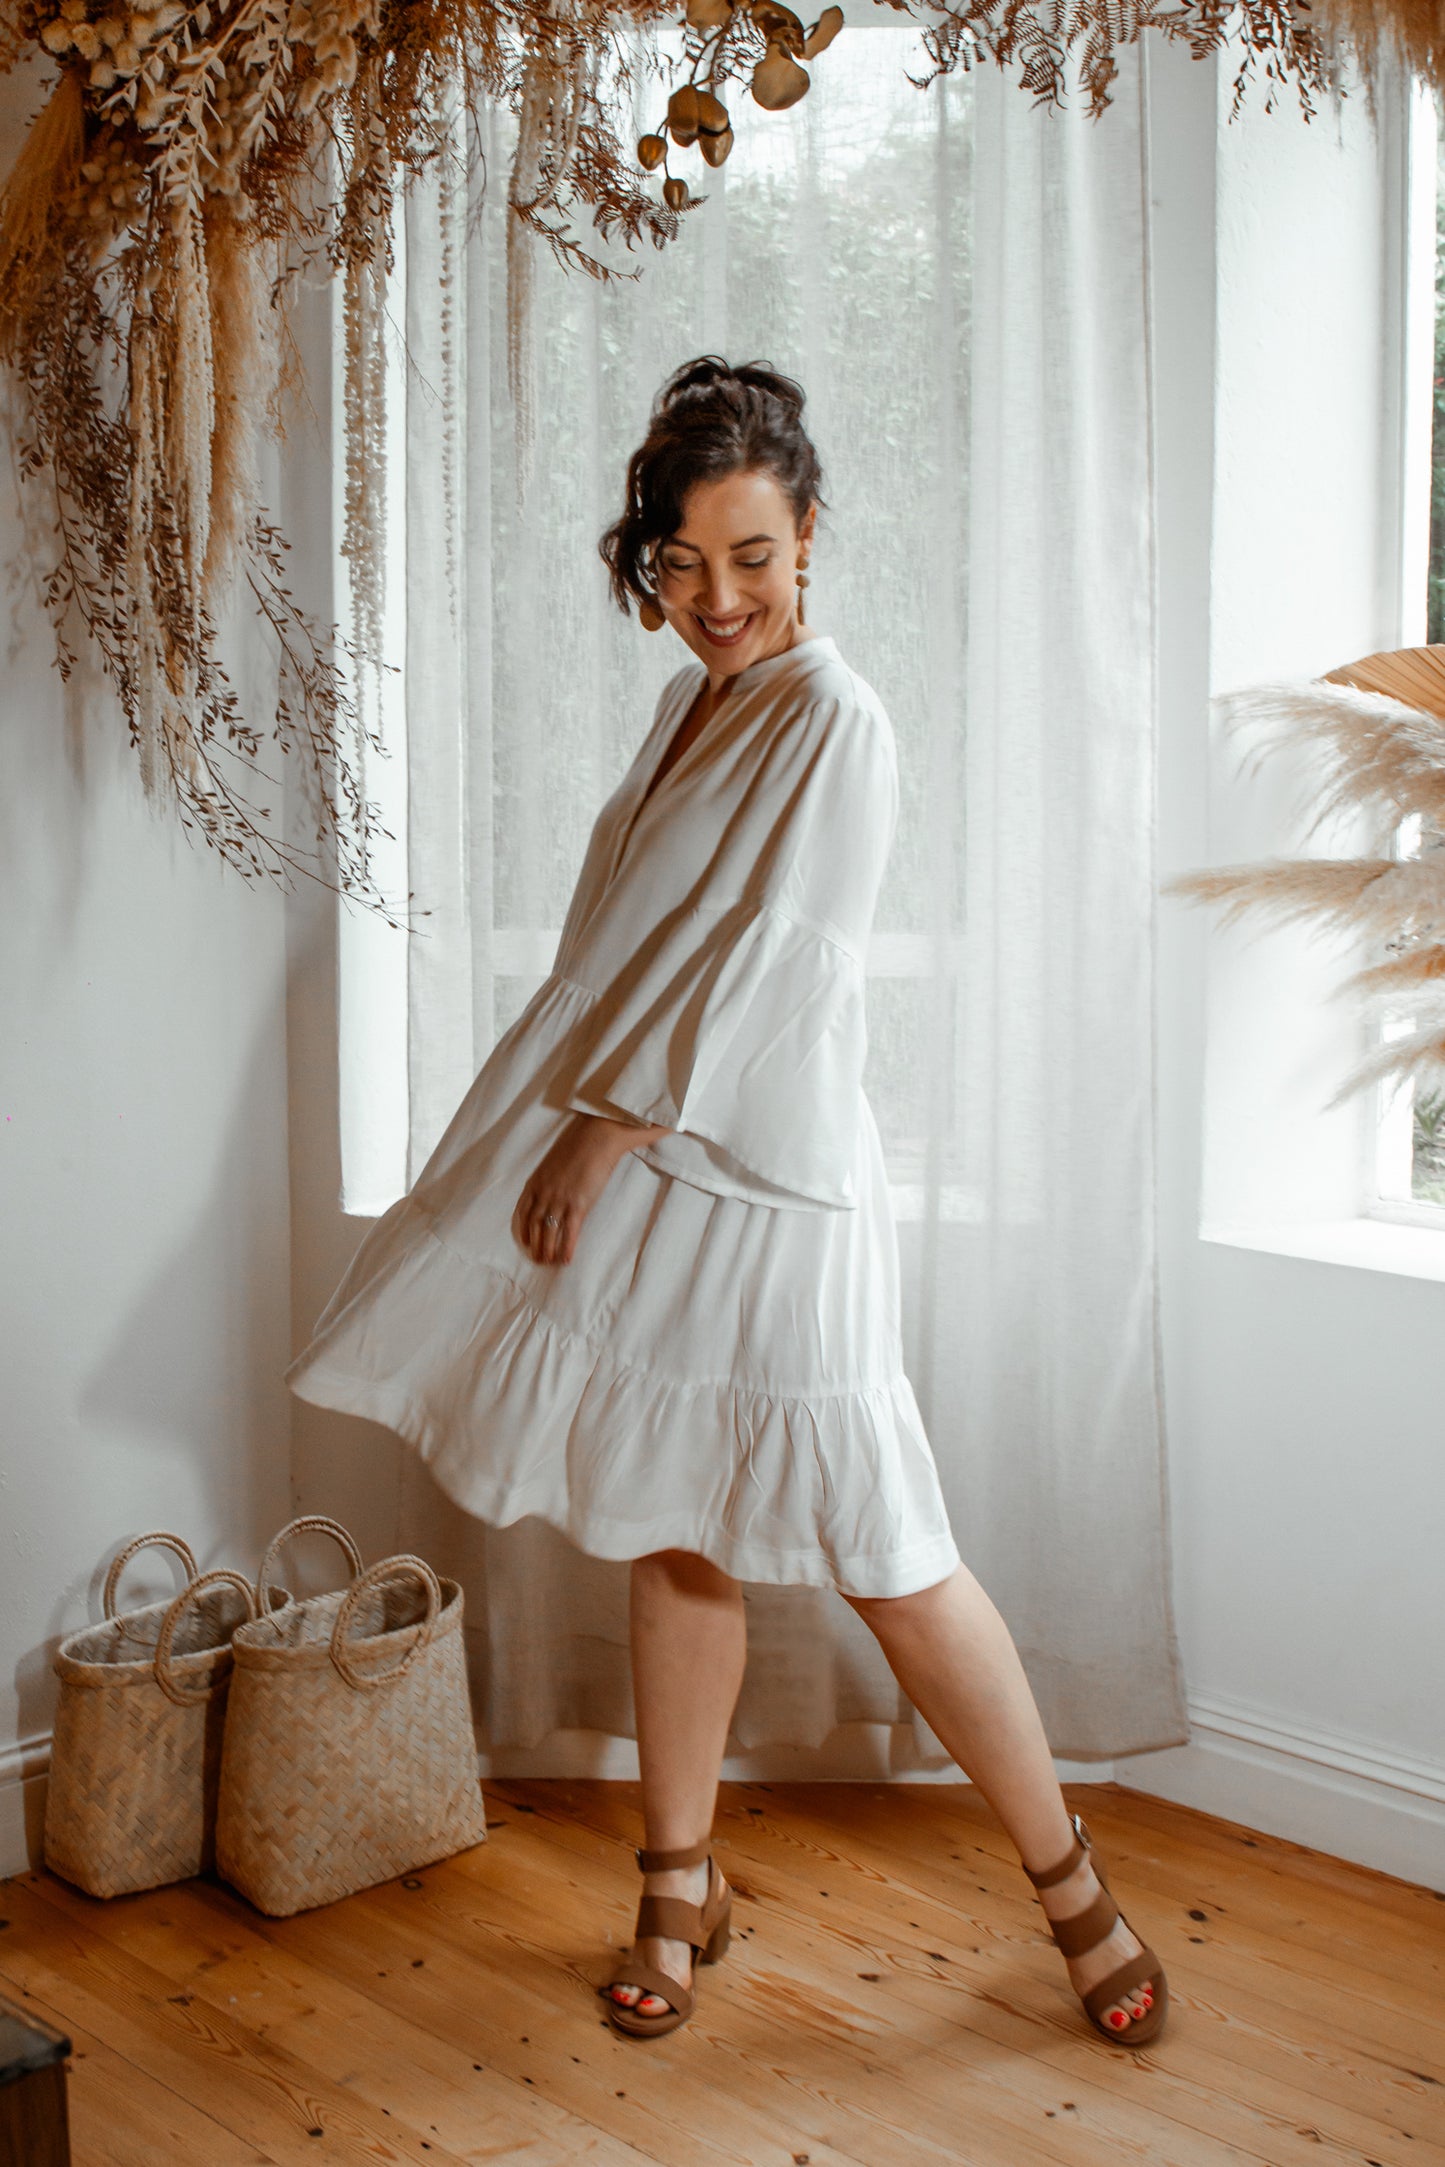 Made from a soft, breathable Rayon/Linen blend fabric, the Anneen Henze Annabelle Dress will be your go-to item this season. Featuring a mandarin collar with buttons (can button down), two-tiered-frill-bottom and soft flowy sleeves. The style can be worn loose and relaxed or taken in at the waist with a belt. Incredibly soft and flattering design.